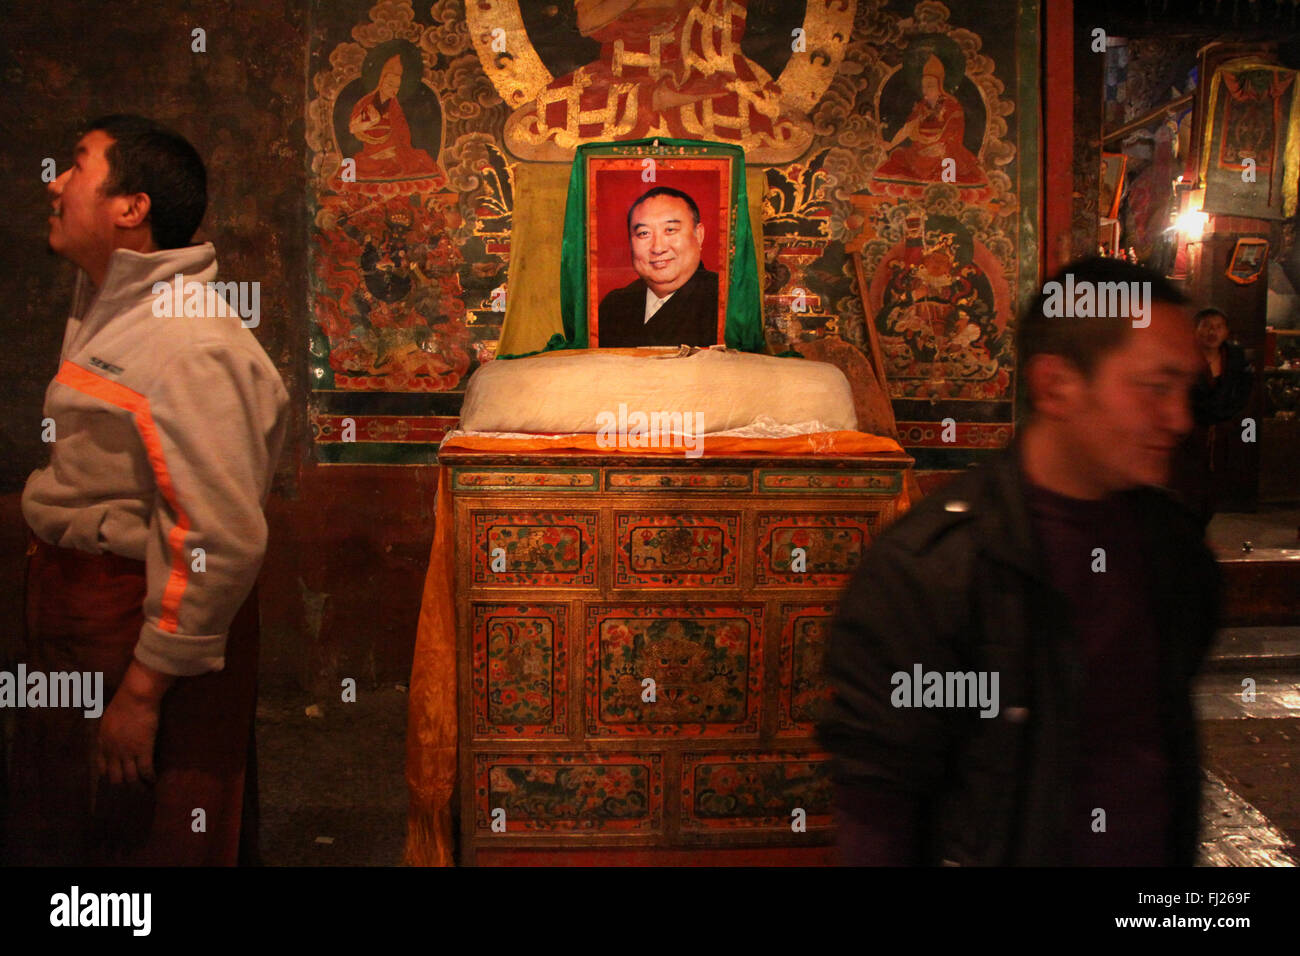 Inside the Gyantse monastery Tibet - a portrait of the official 10th panchen Lama, Tibet Stock Photo